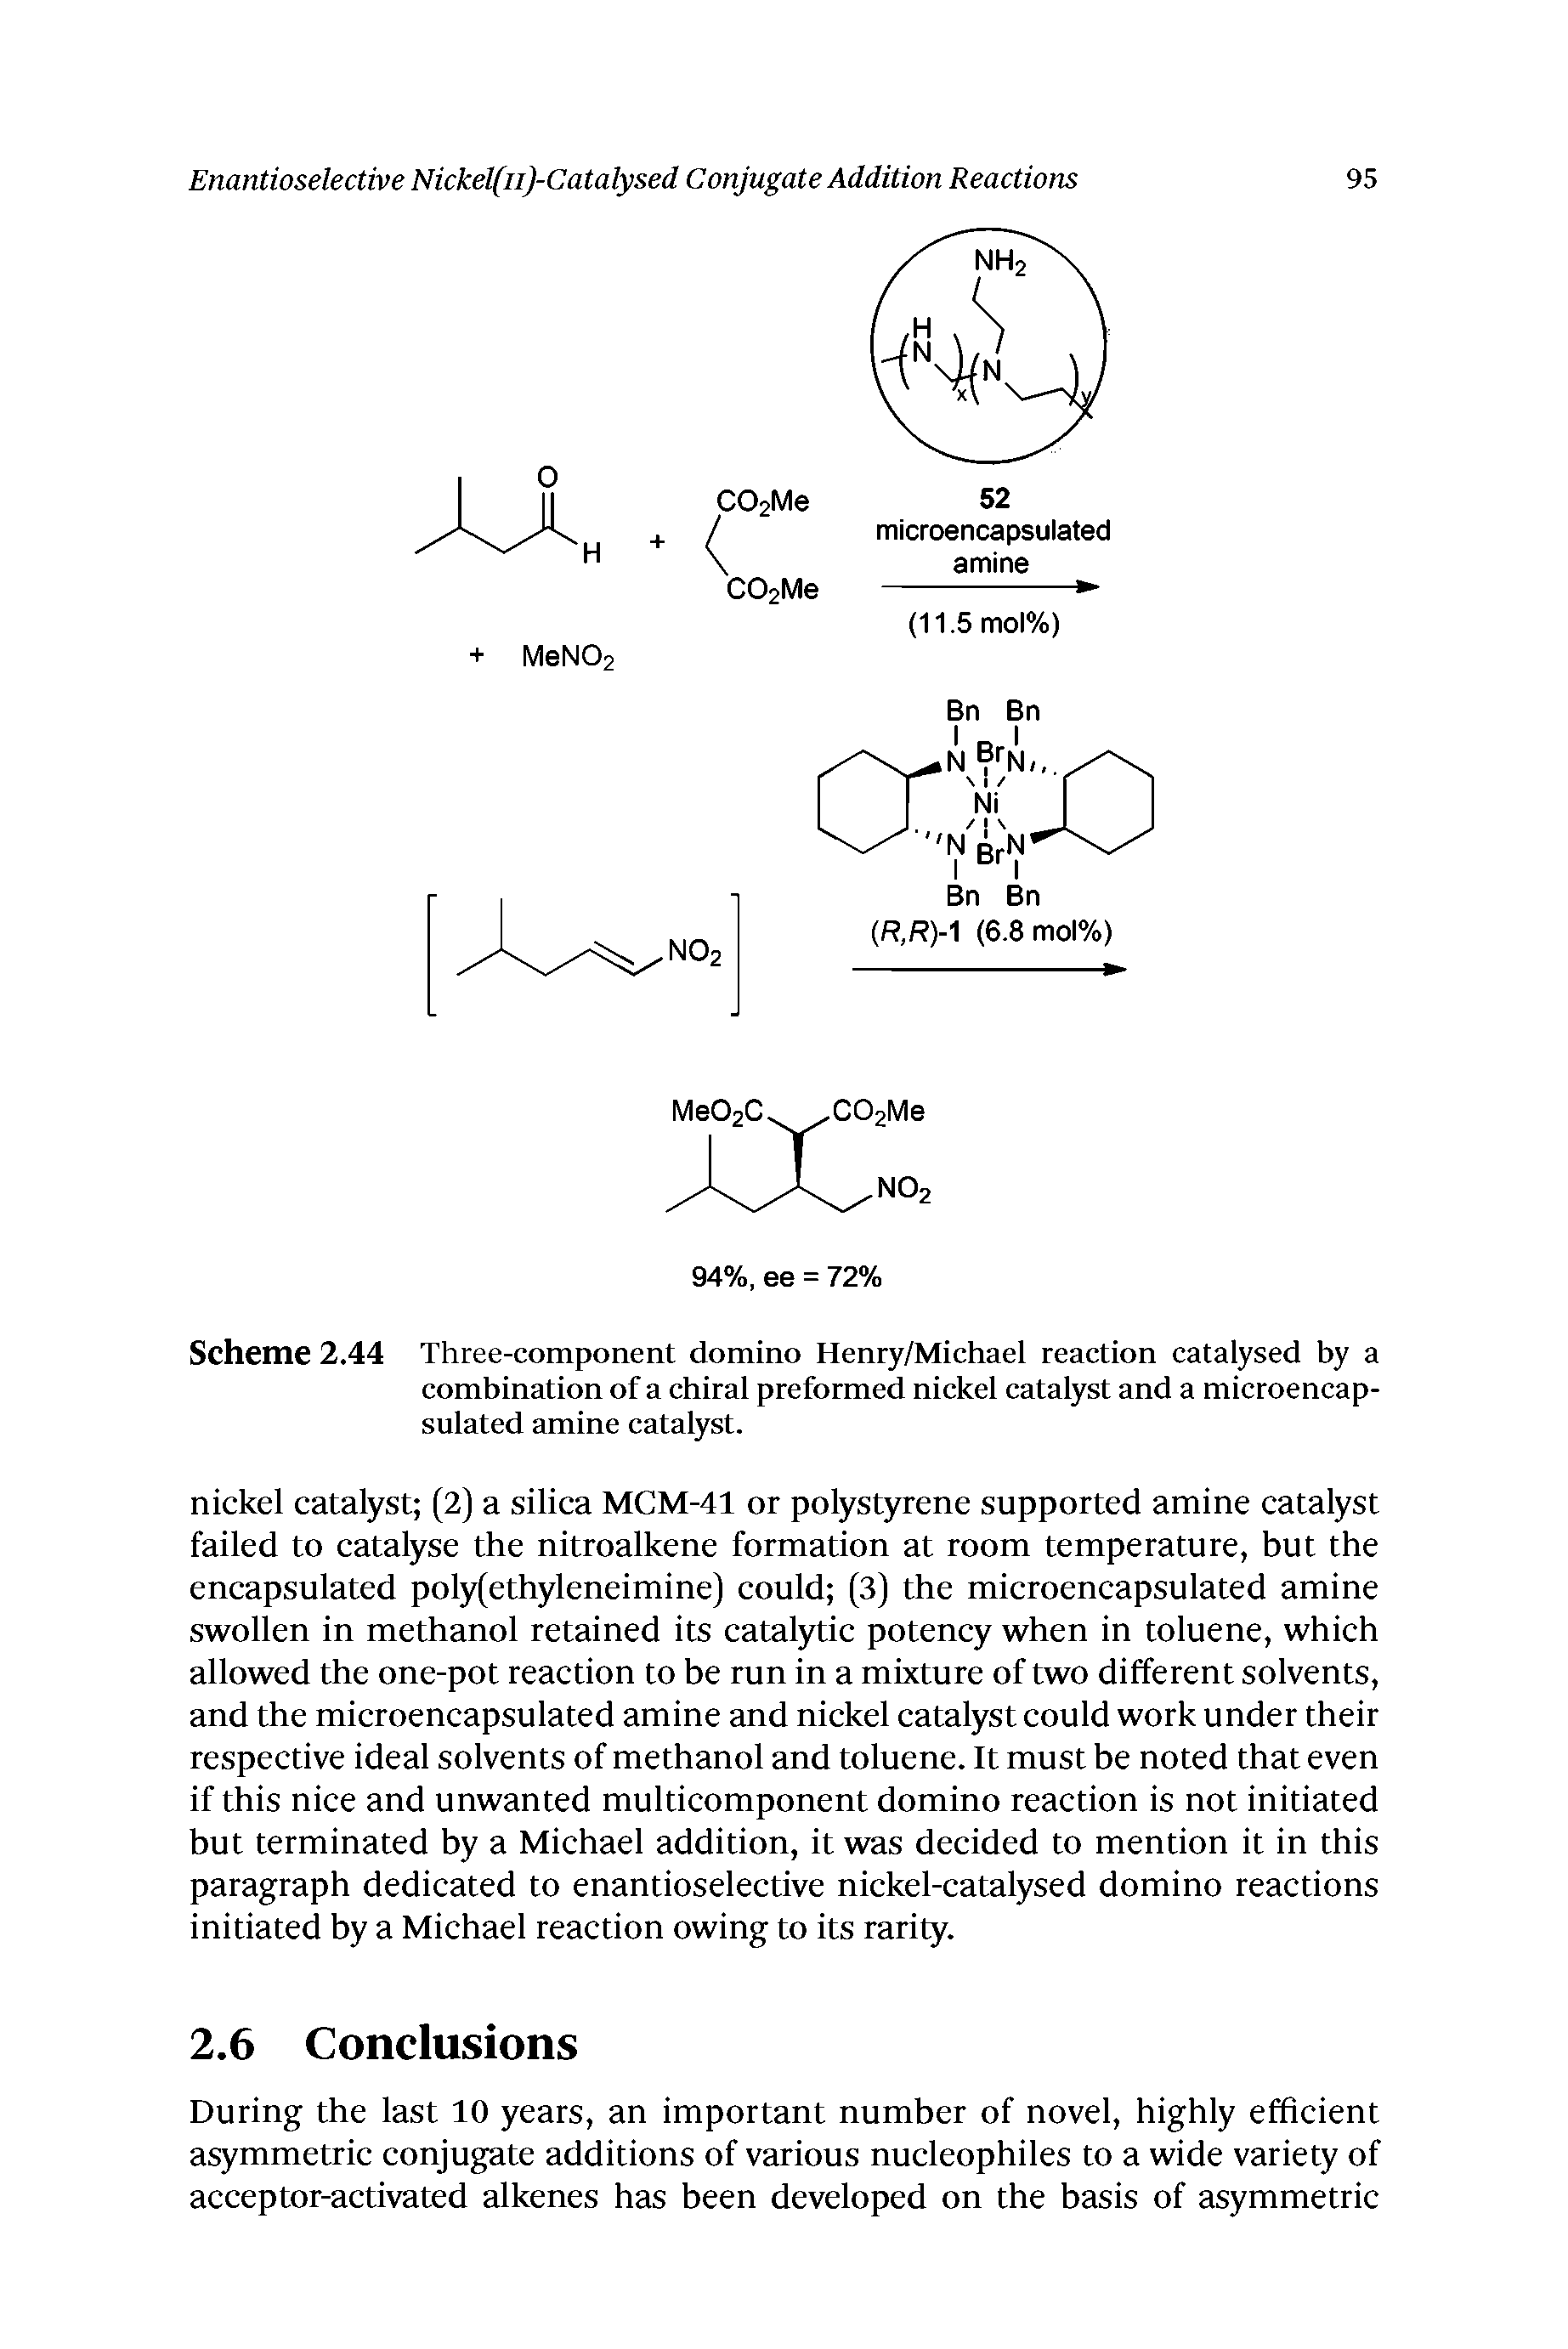 Scheme 2.44 Three-component domino Heniy/Michael reaction catalysed by a combination of a chiral preformed nickel catalyst and a microencapsulated amine catalyst.